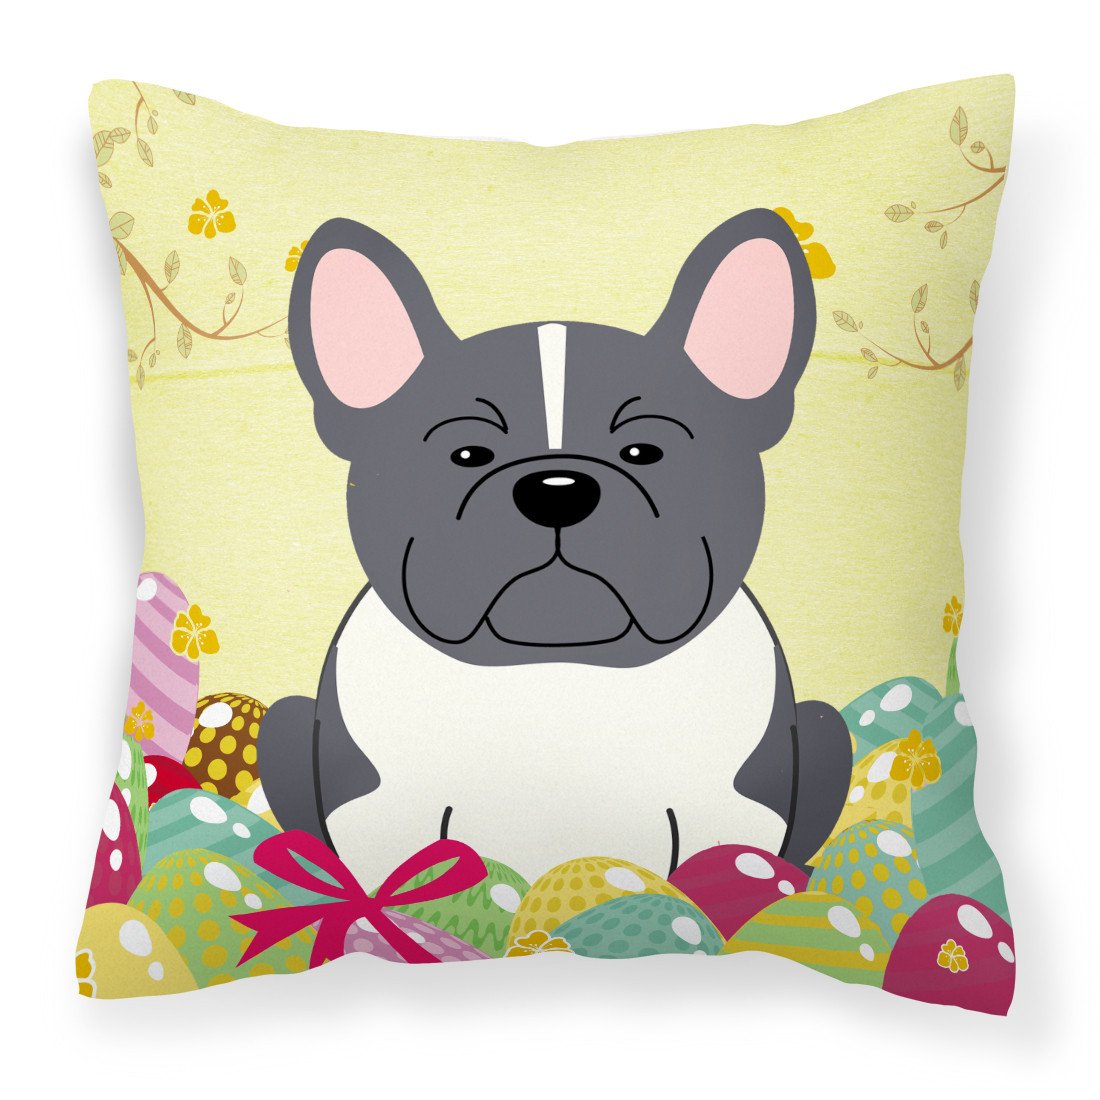 Easter Eggs French Bulldog Black White Fabric Decorative Pillow BB6012PW1818 by Caroline's Treasures